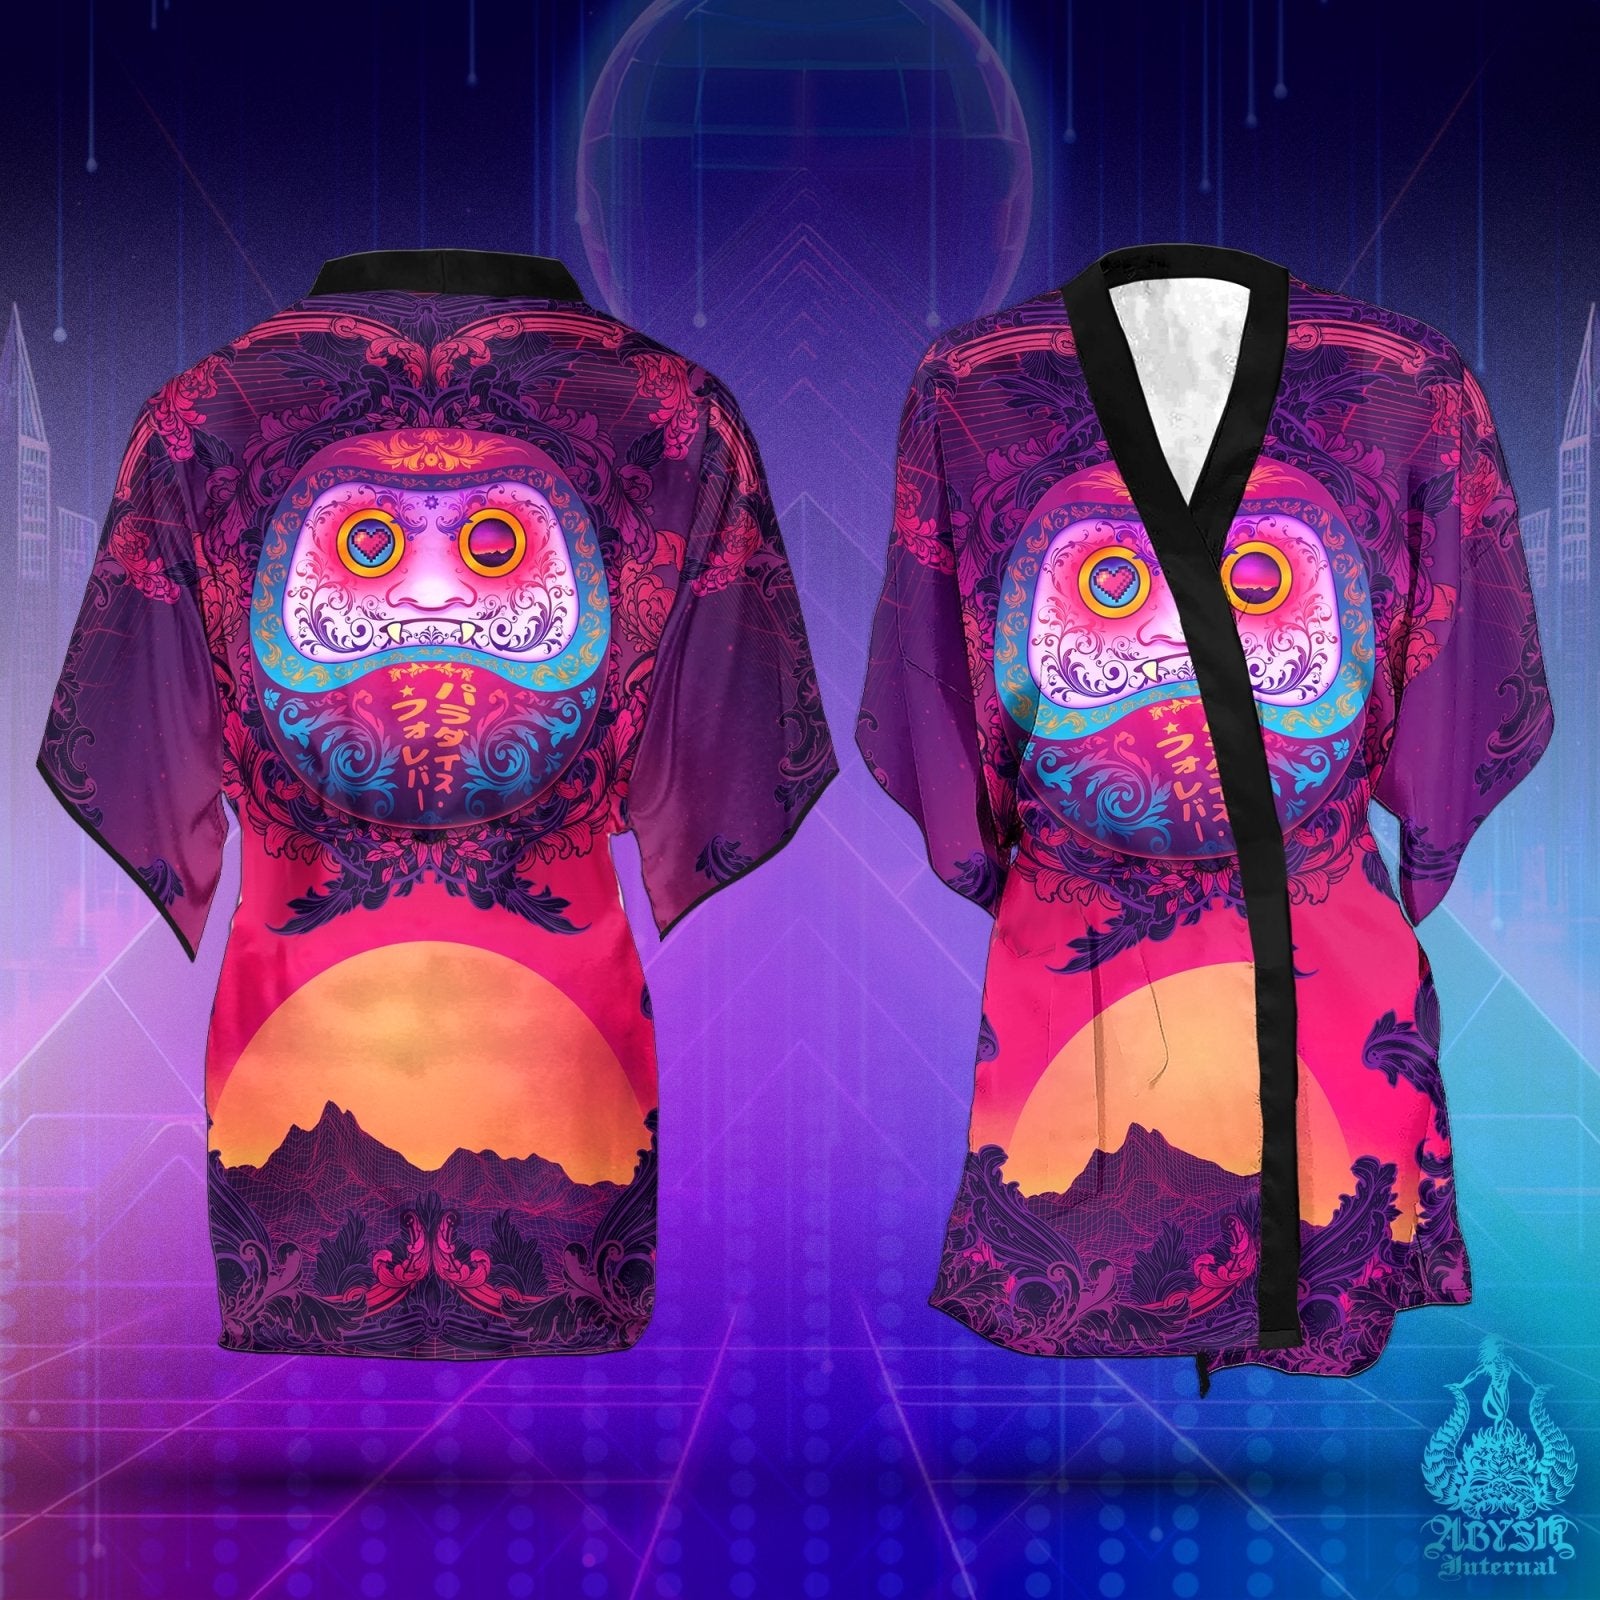 Anime Convention Cover Up, Synthwave Outfit, Retrowave Party Kimono, Vaporwave Summer Festival Robe, Japanese Art, Psychedelic 80s, Alternative Clothing, Unisex - Daruma - Abysm Internal